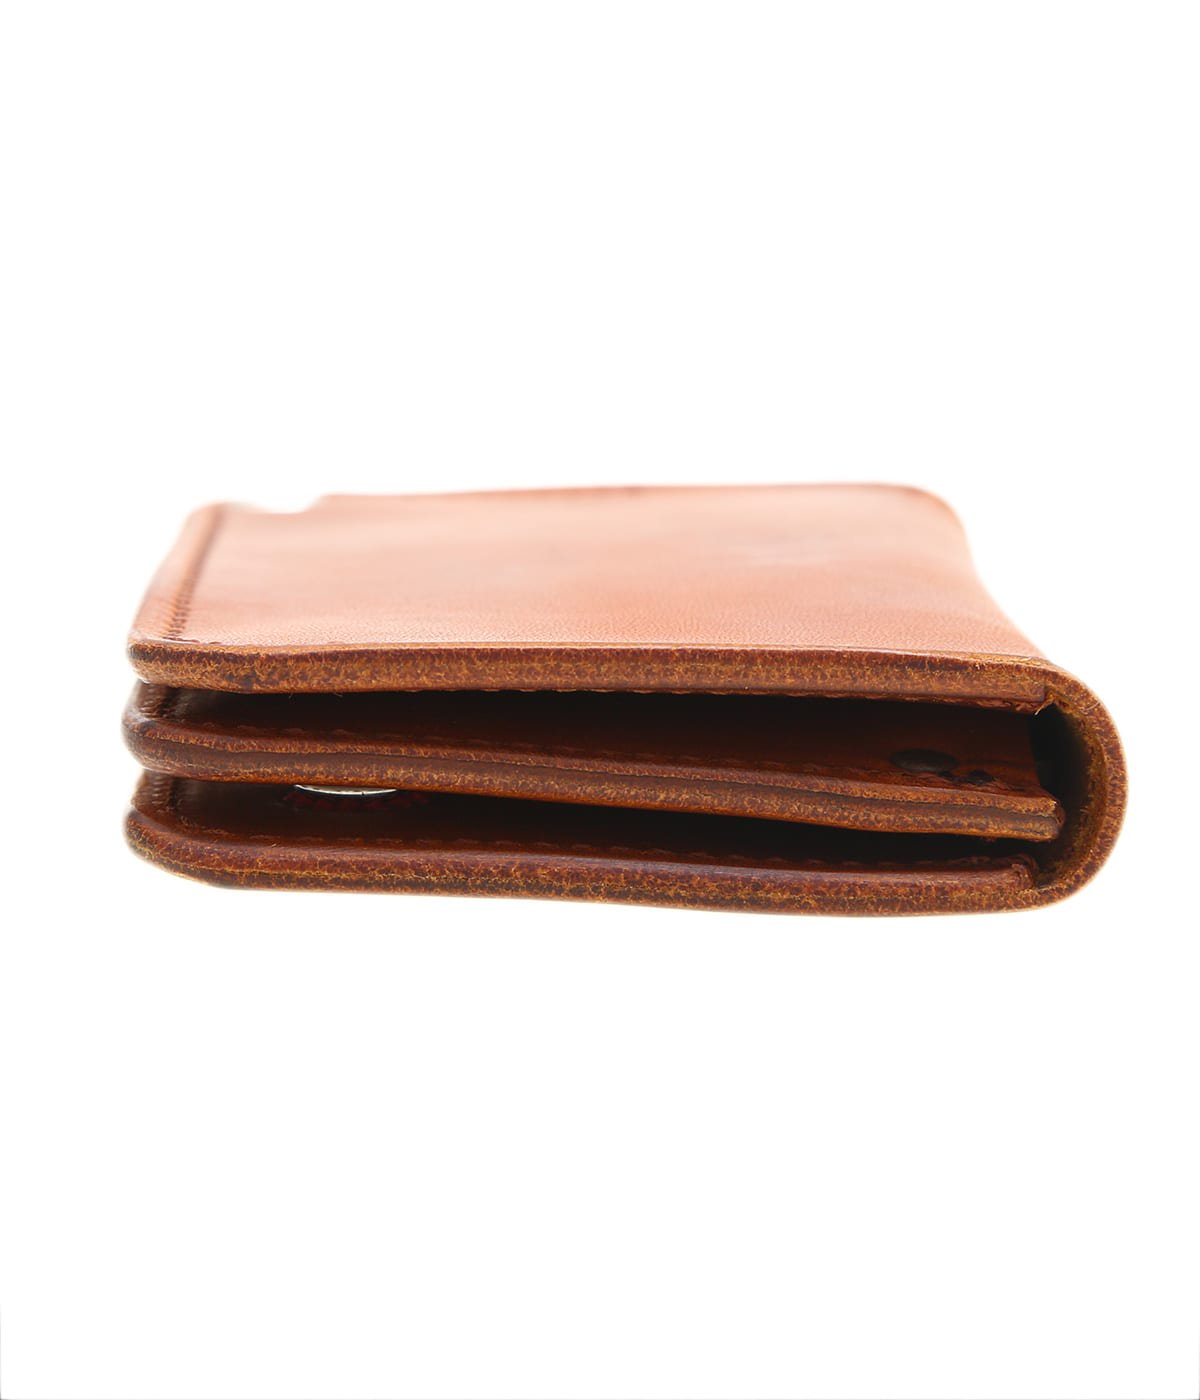 Truckers Wallet (S) -メダル付き-